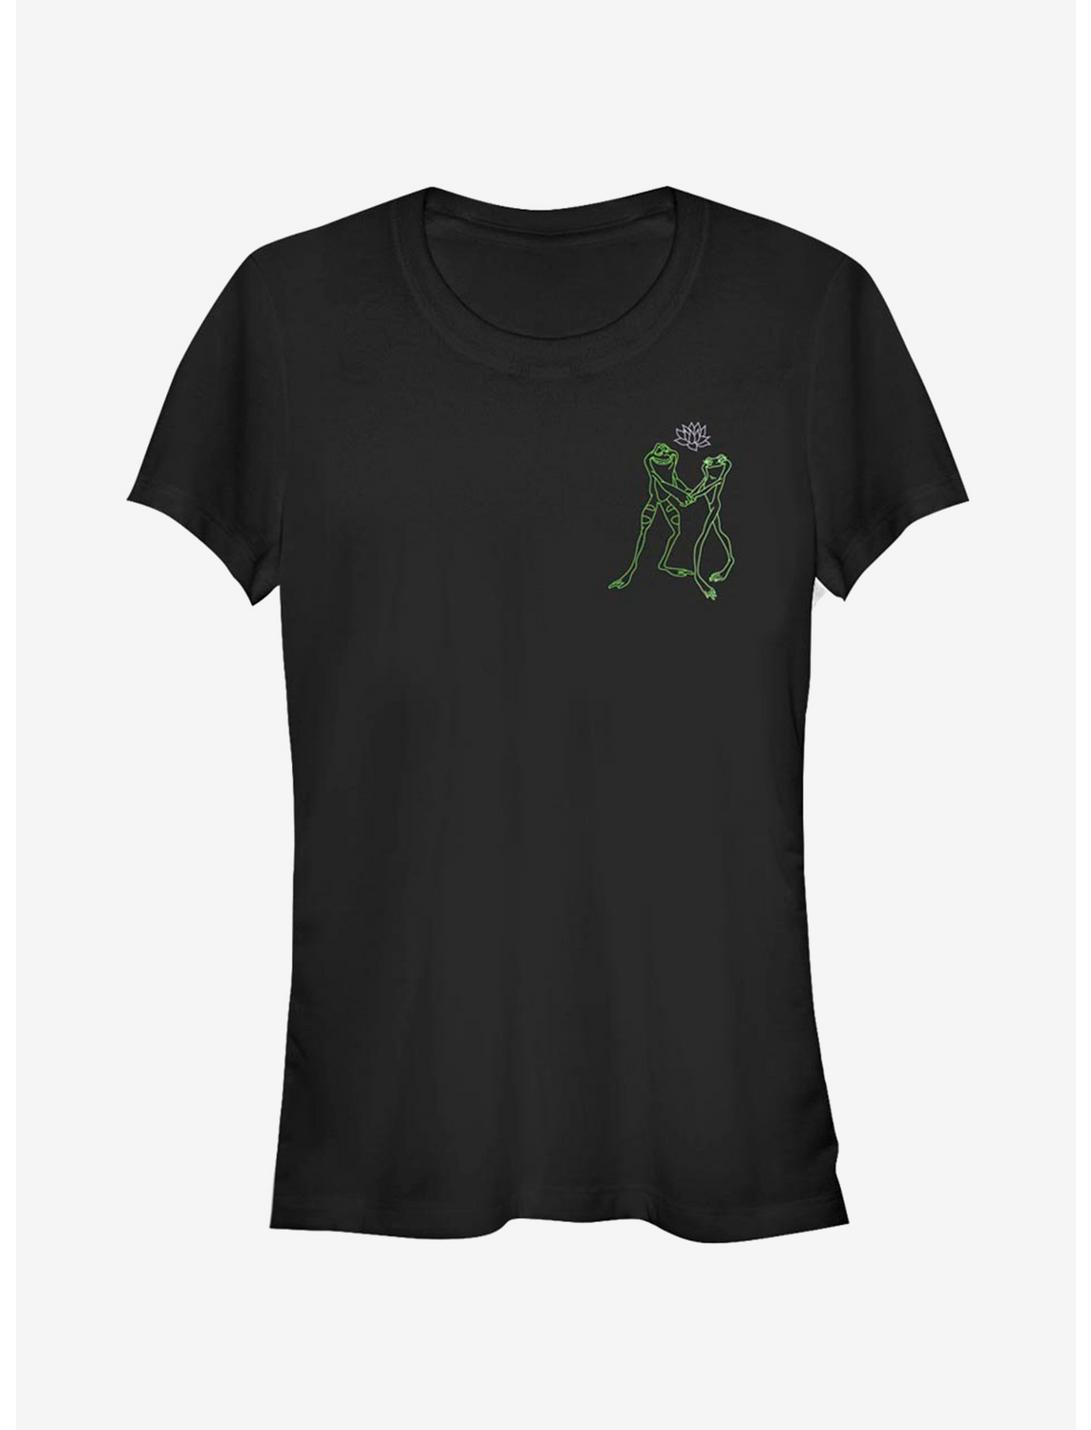 Disney The Princess And The Frog Dancing Frogs Girls T-Shirt, BLACK, hi-res